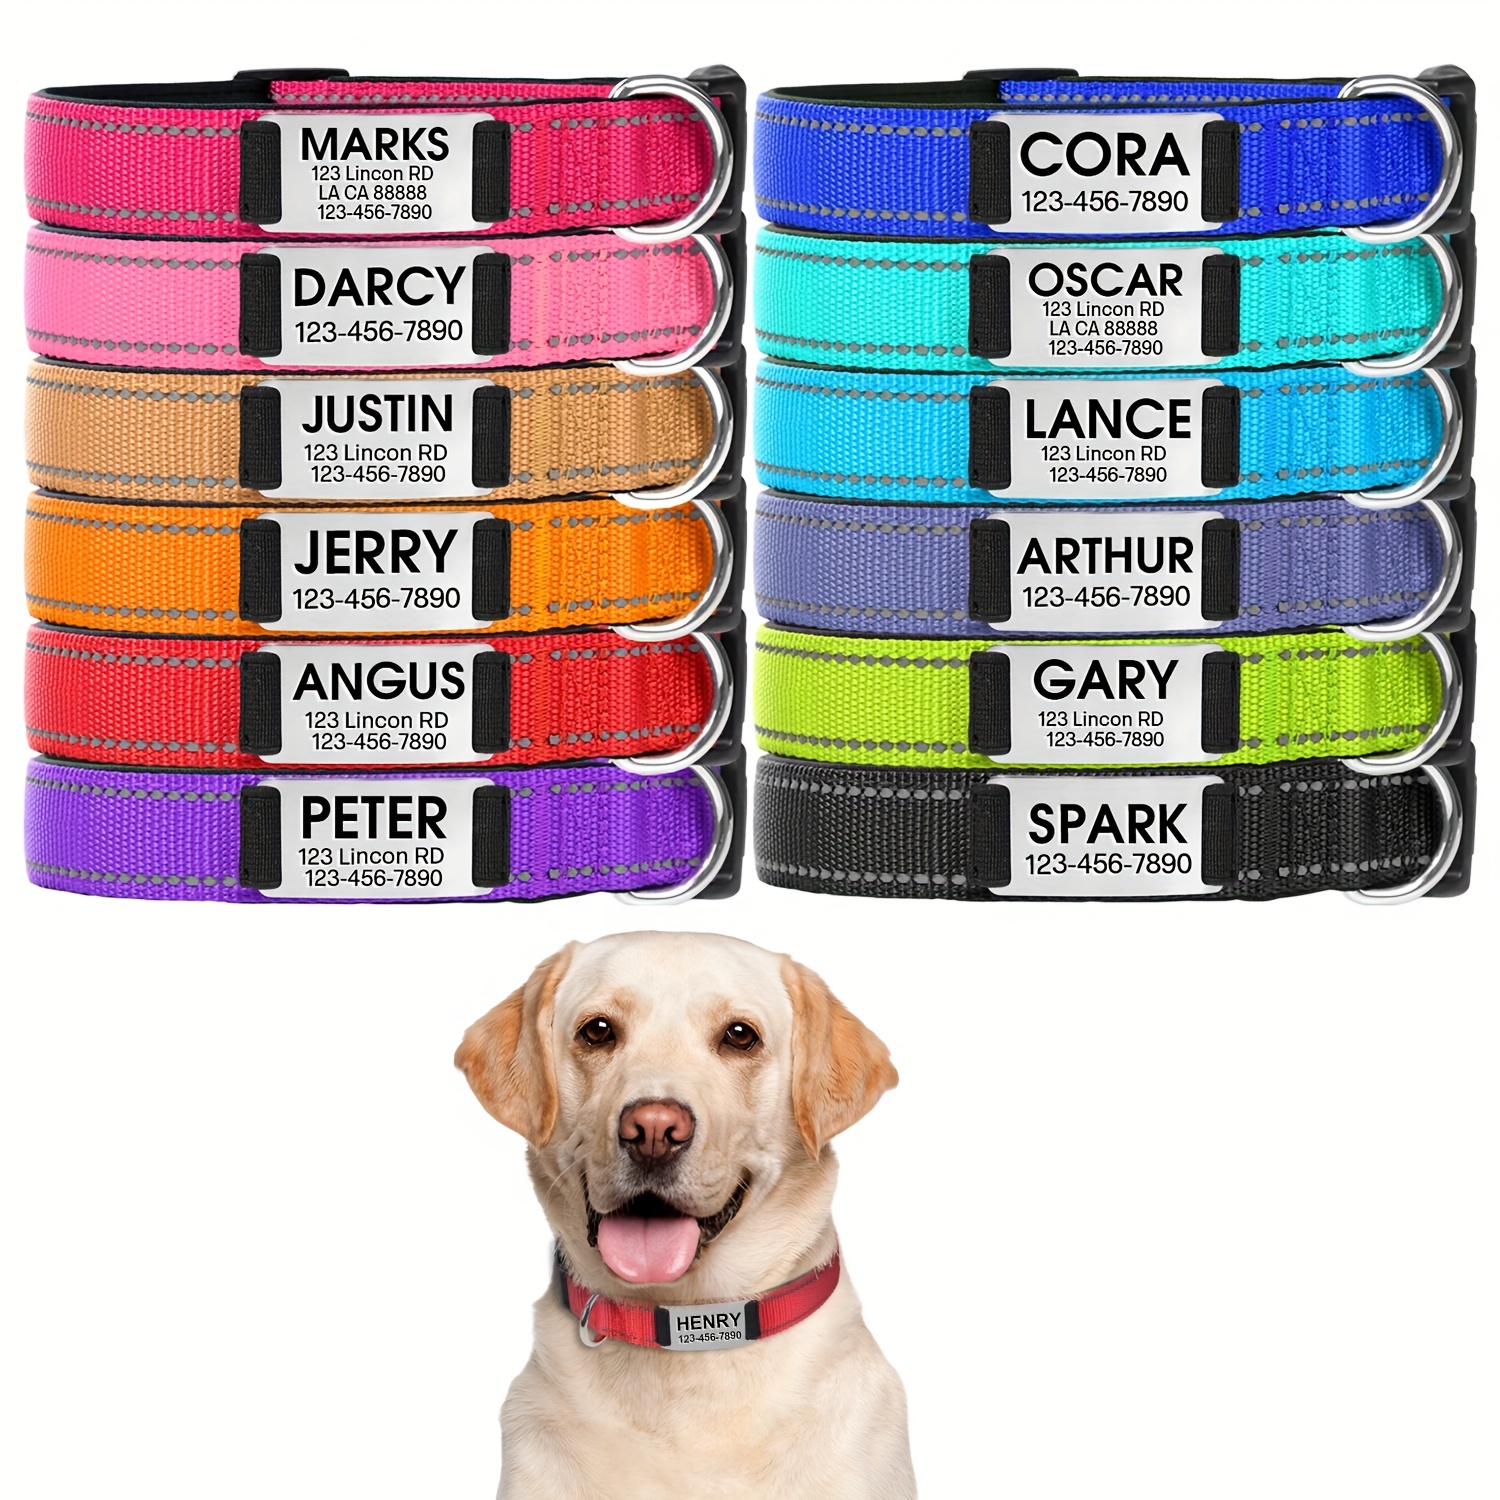 

Dog Collar With Name Plate, Personalized Dog Collar For Medium Dogs, Custom Reflective Padded Pet Collars With Engraved Slide On Id Tags